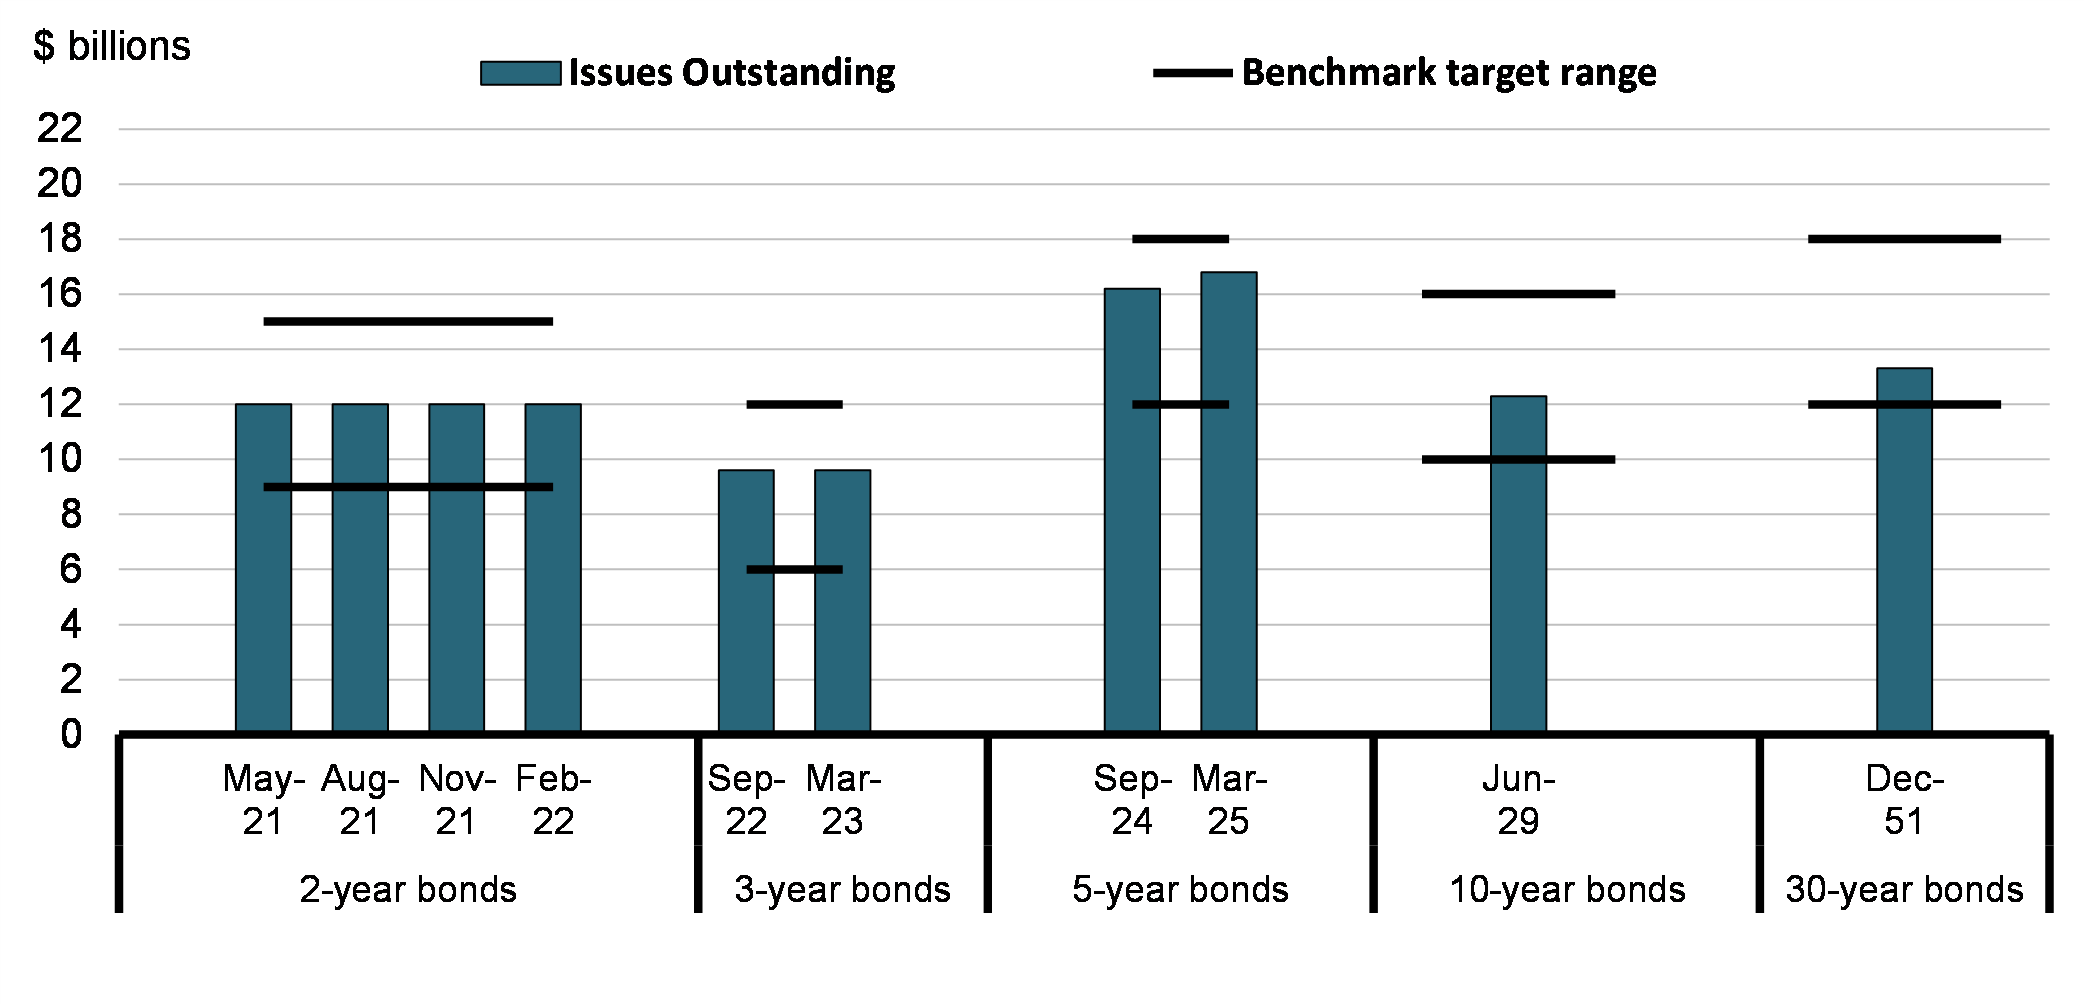 Chart 8 - Size of Gross Bond Benchmarks in 2019-20